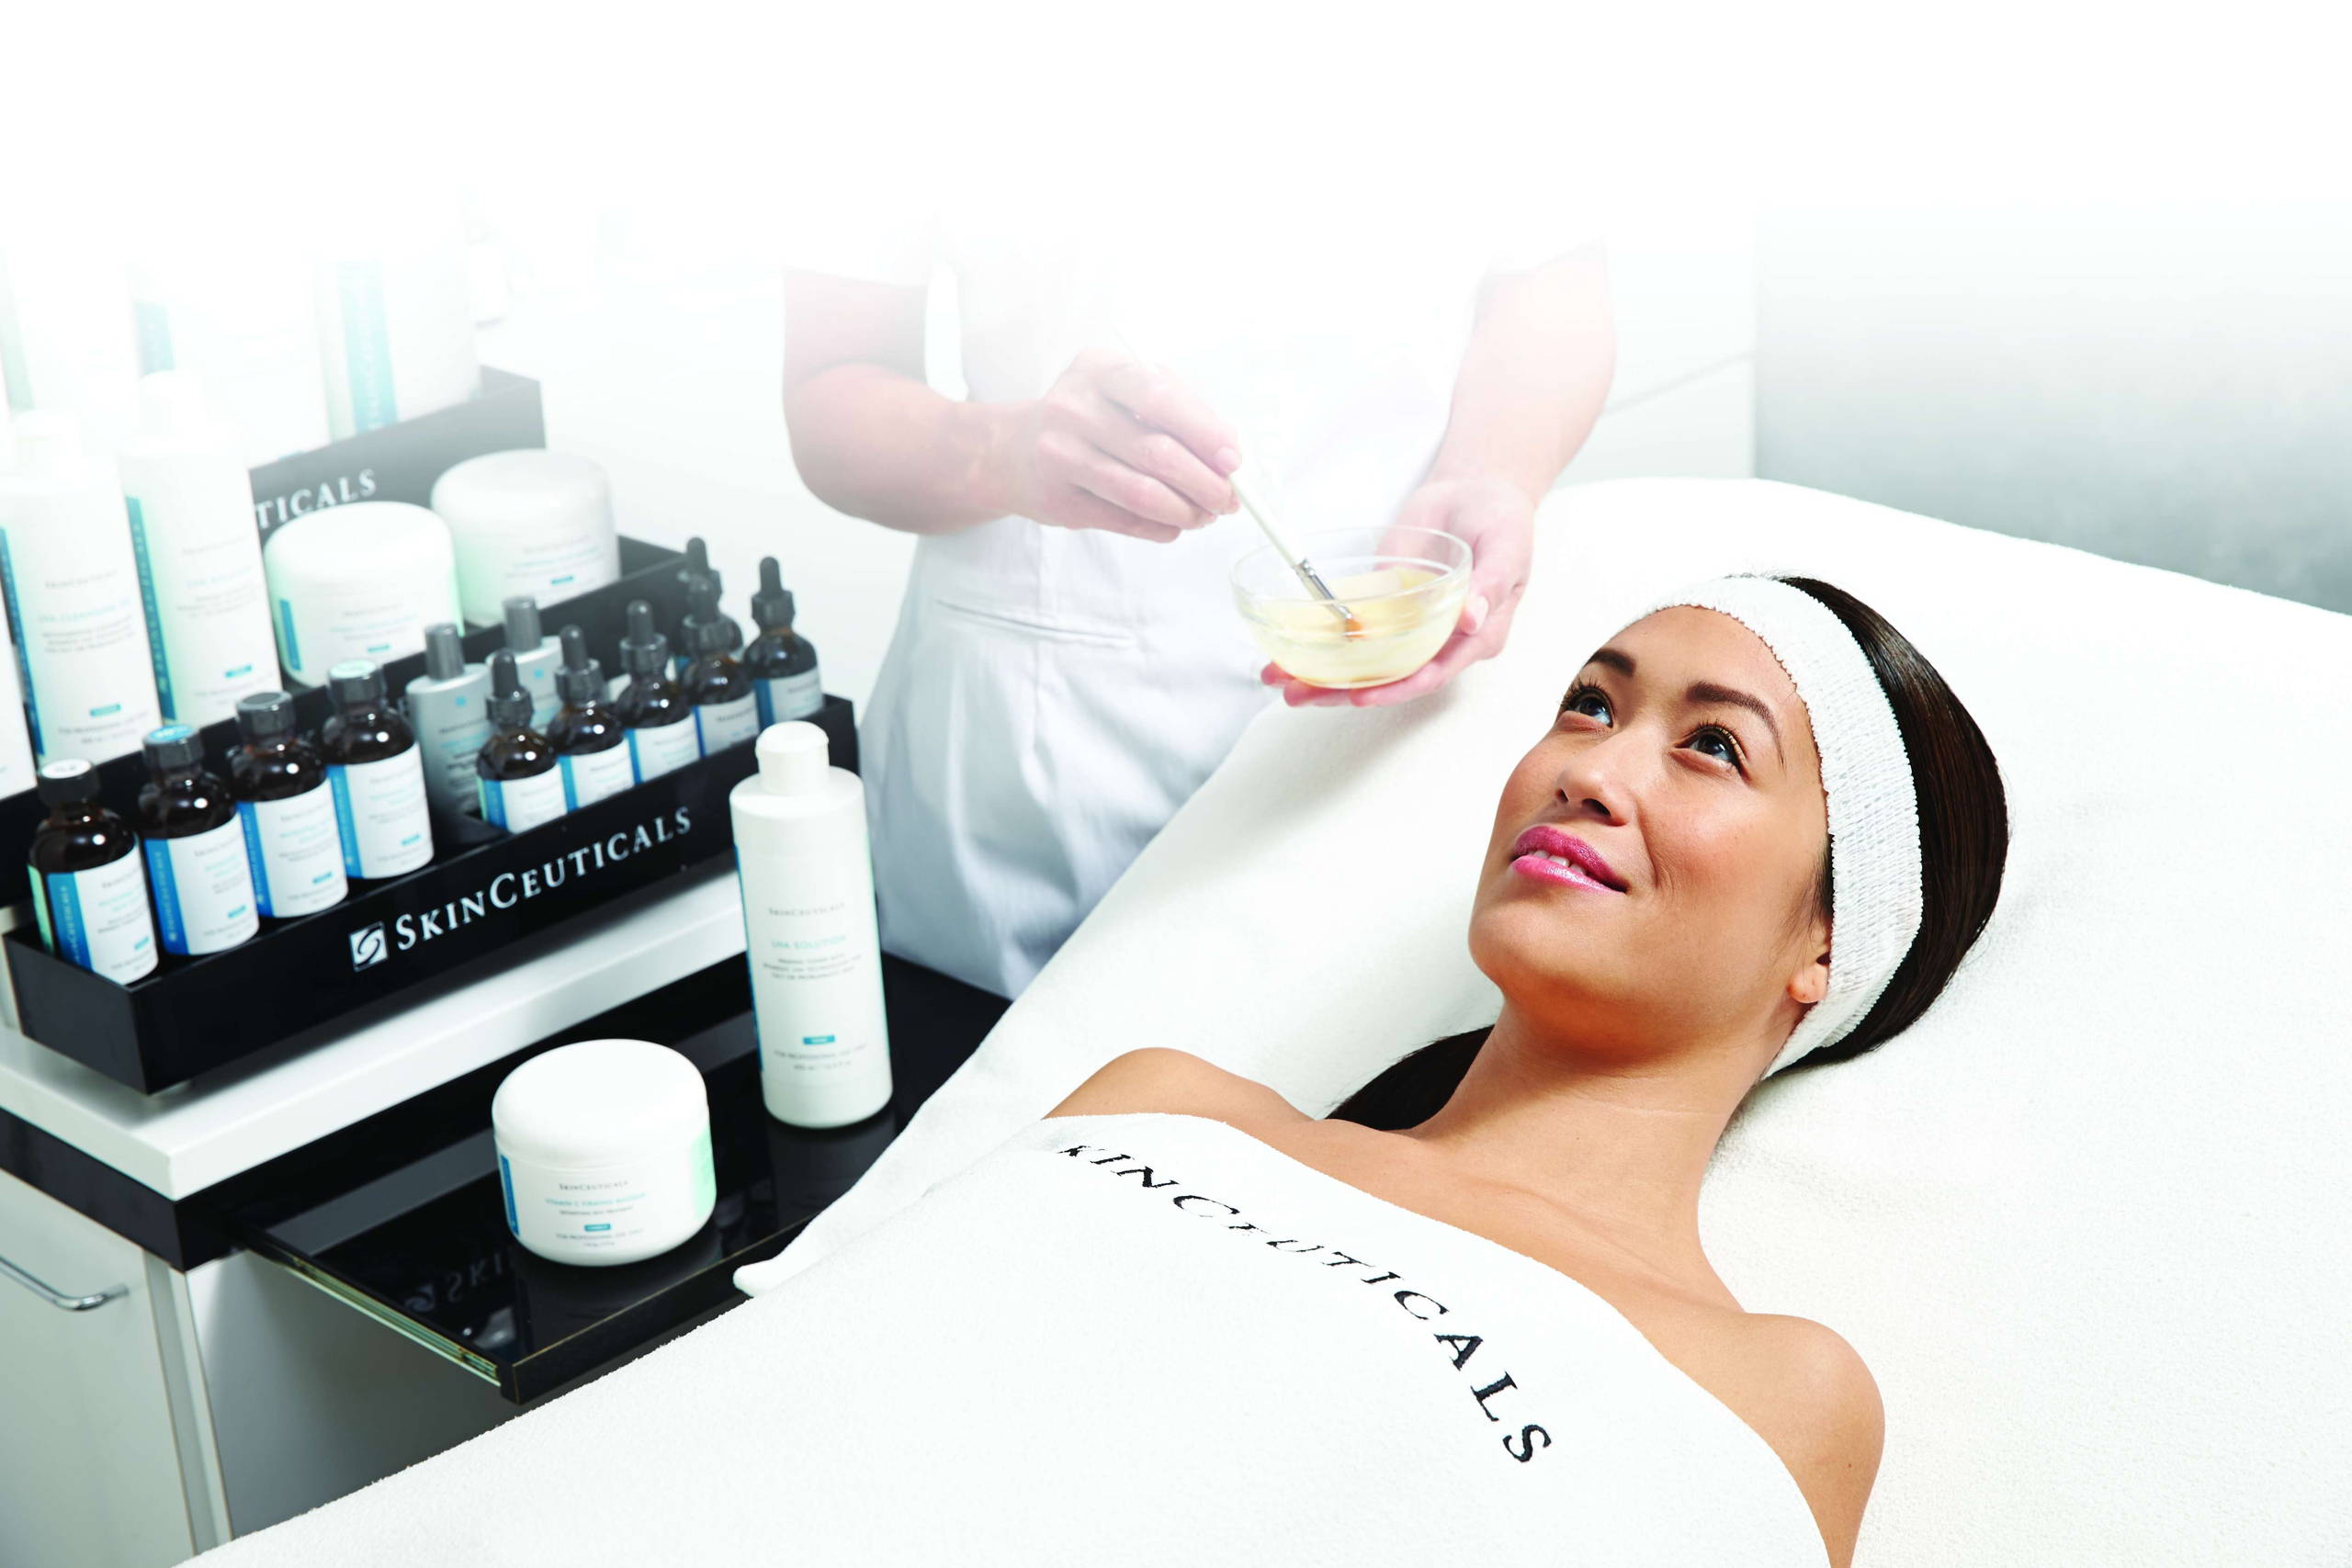 SKINCEUTICALS FACIAL TREATMENT AT PEBBLE AESTHETIC